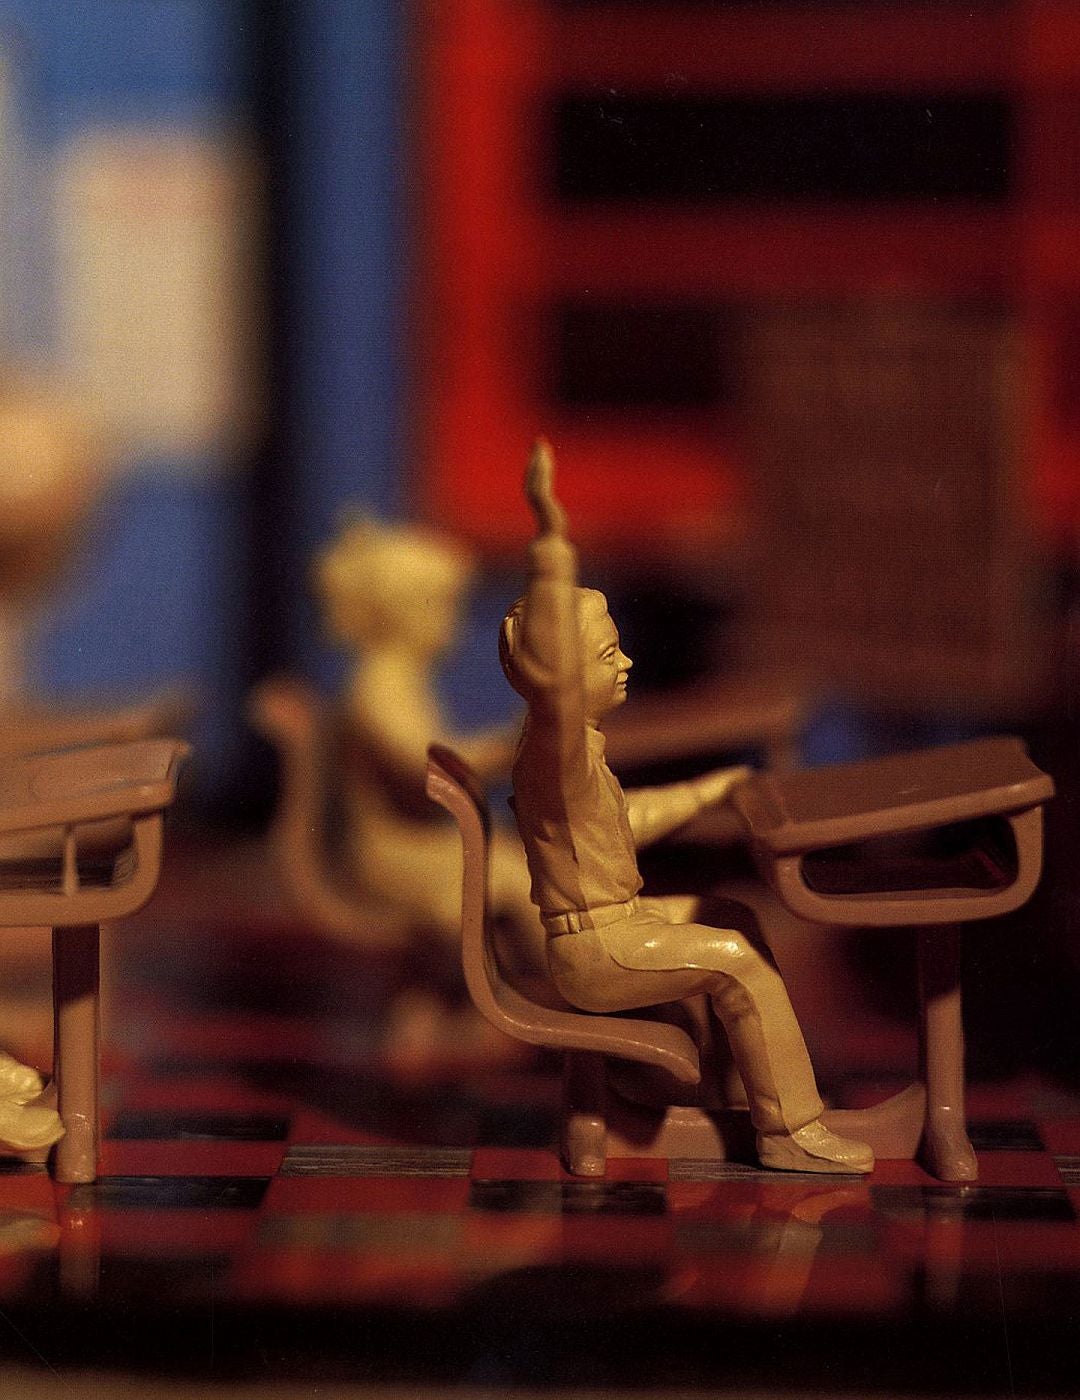 David Levinthal: Small Wonder: Worlds in a Box [SIGNED]